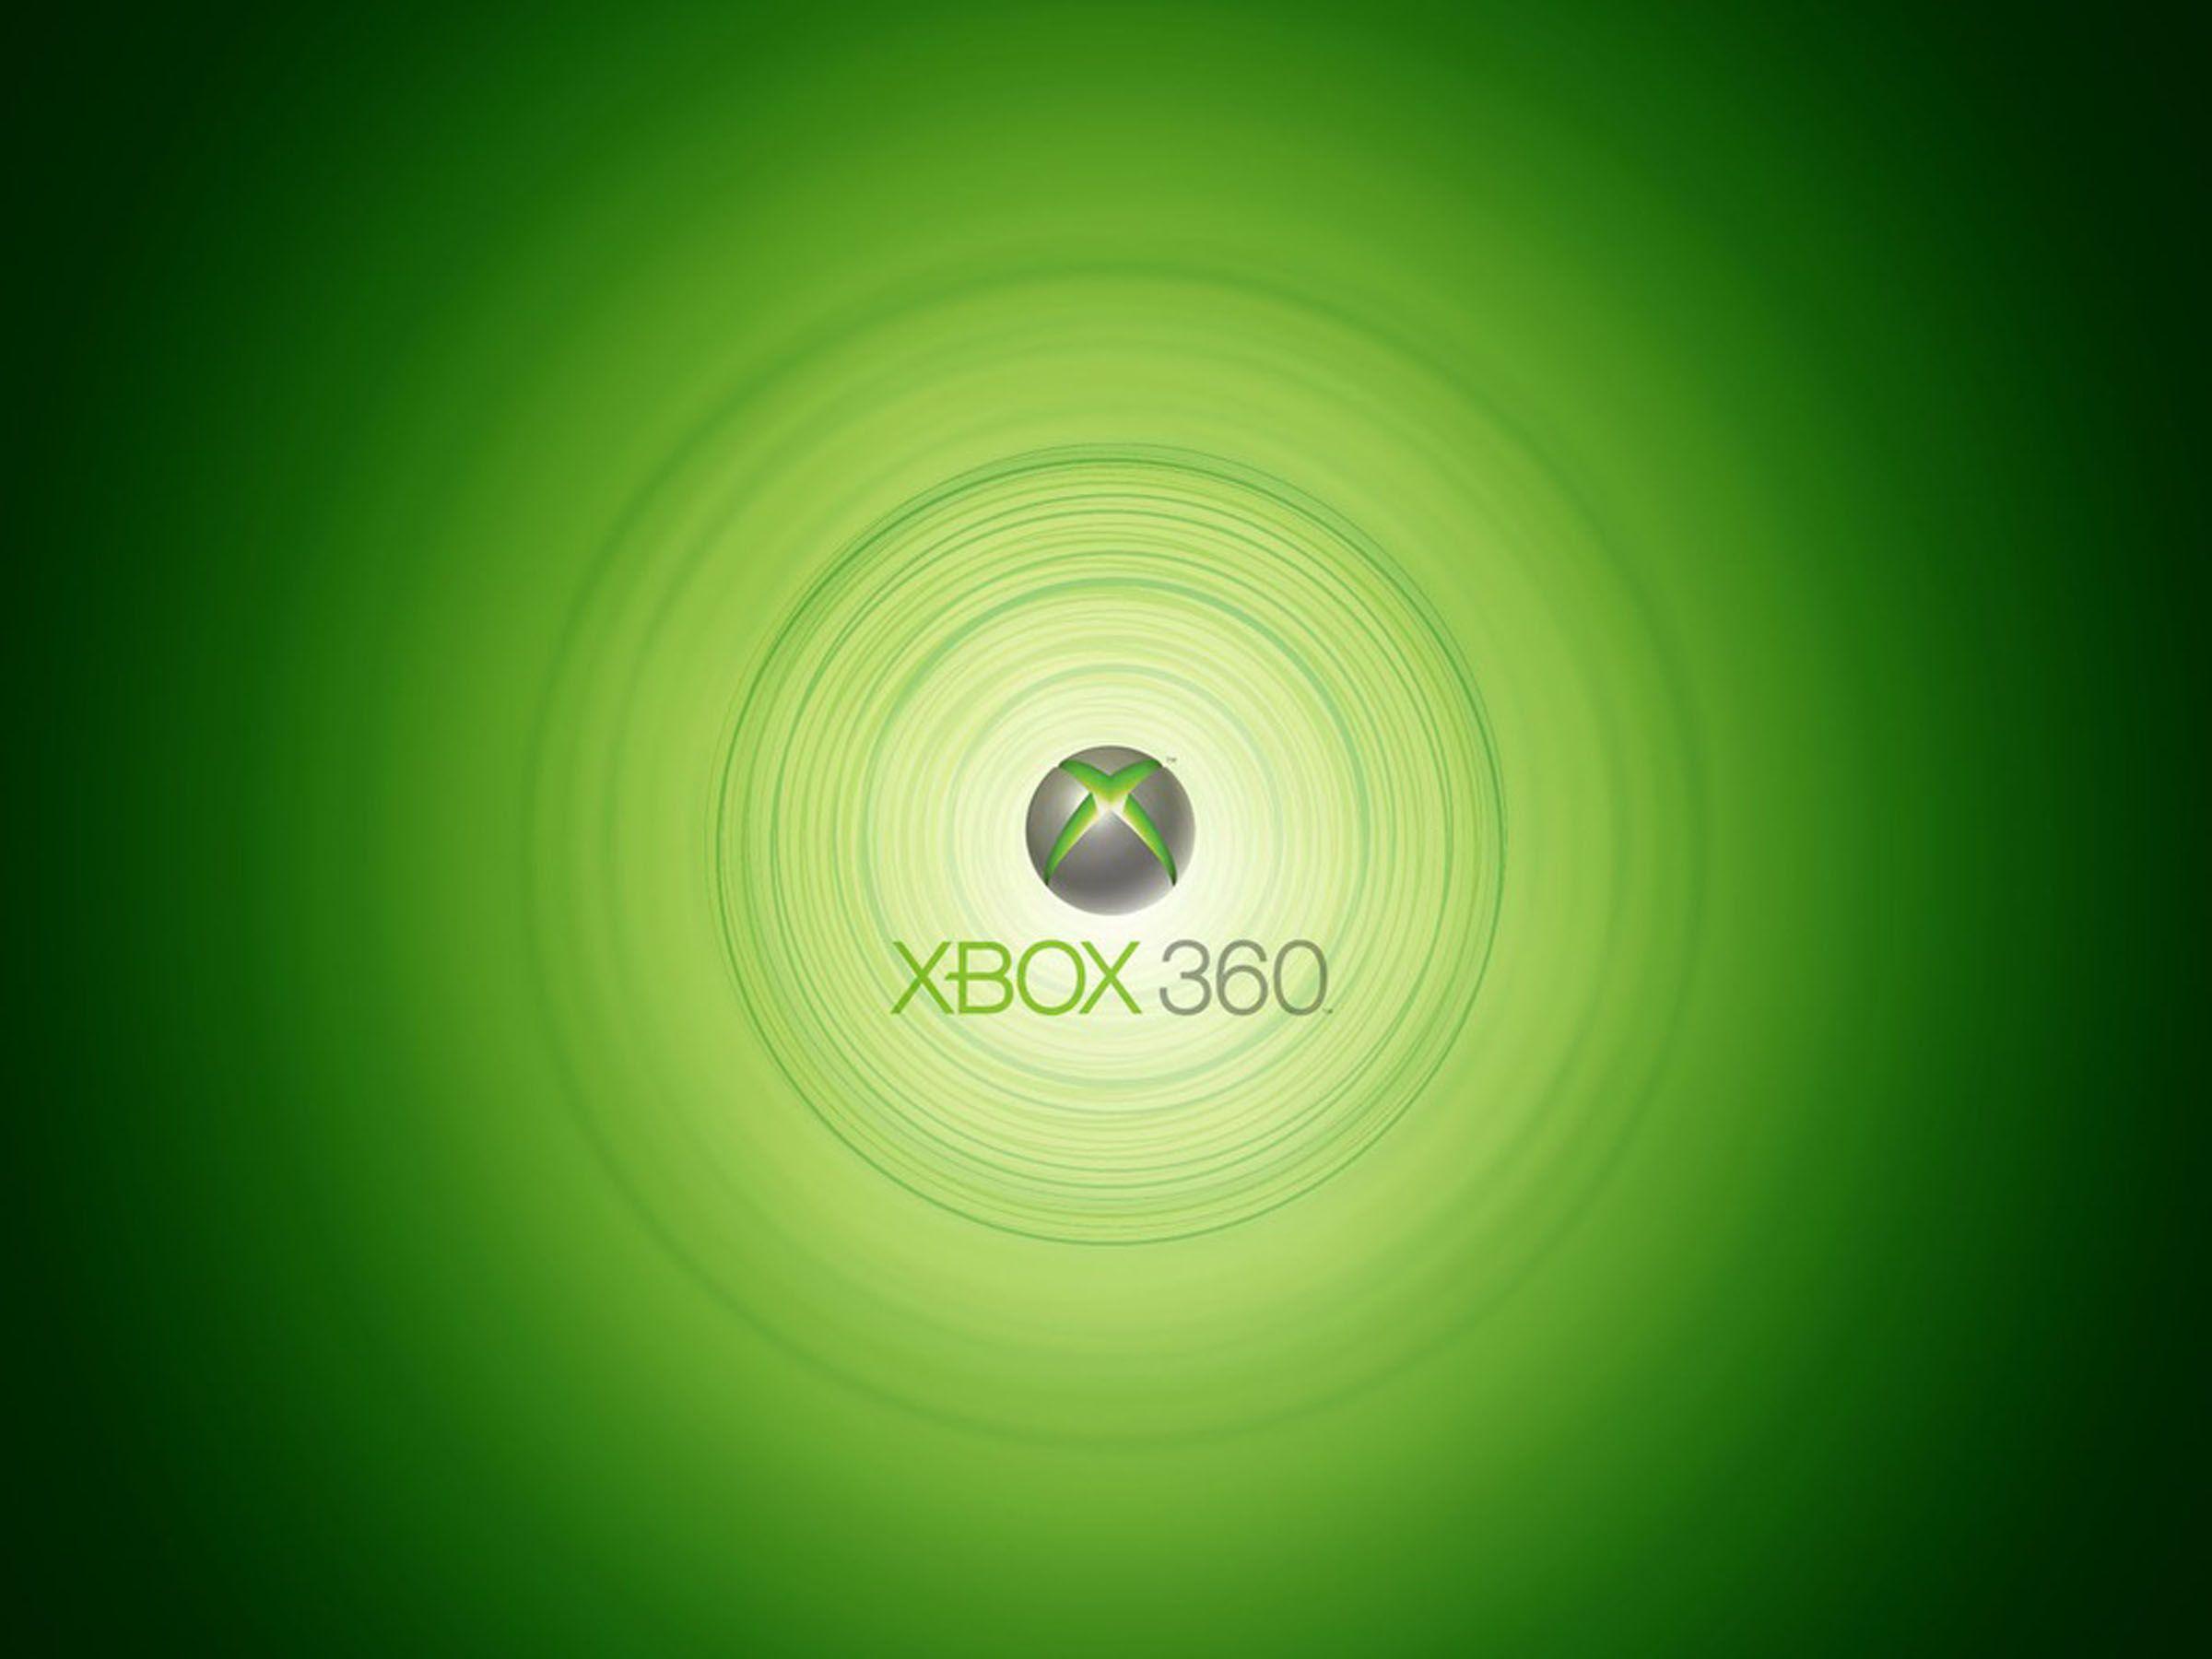 Xbox 360 Wallpapers Hd Wallpaper Cave | Free Download Nude Photo Gallery